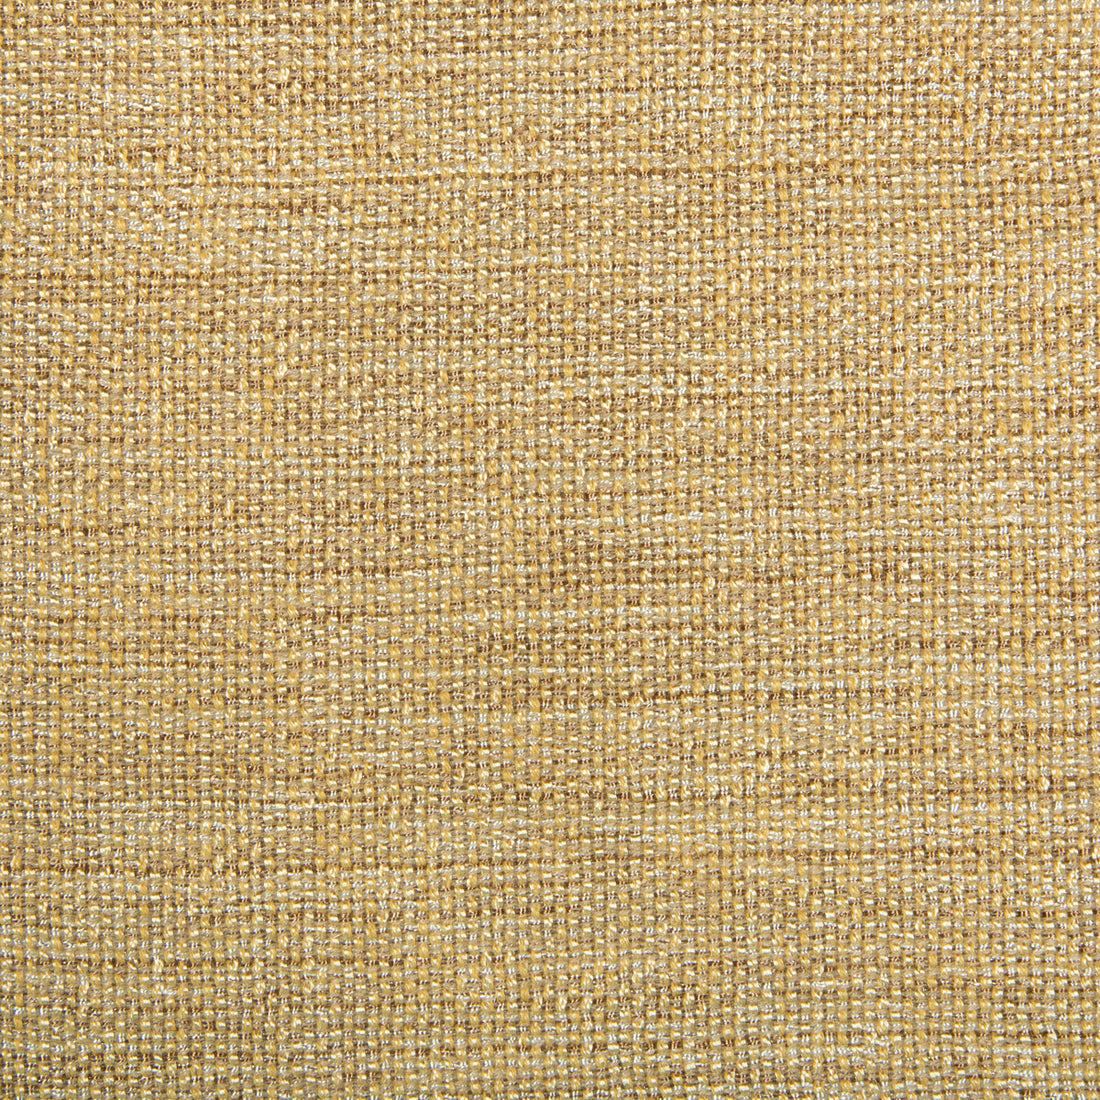 Kravet Contract fabric in 34926-414 color - pattern 34926.414.0 - by Kravet Contract